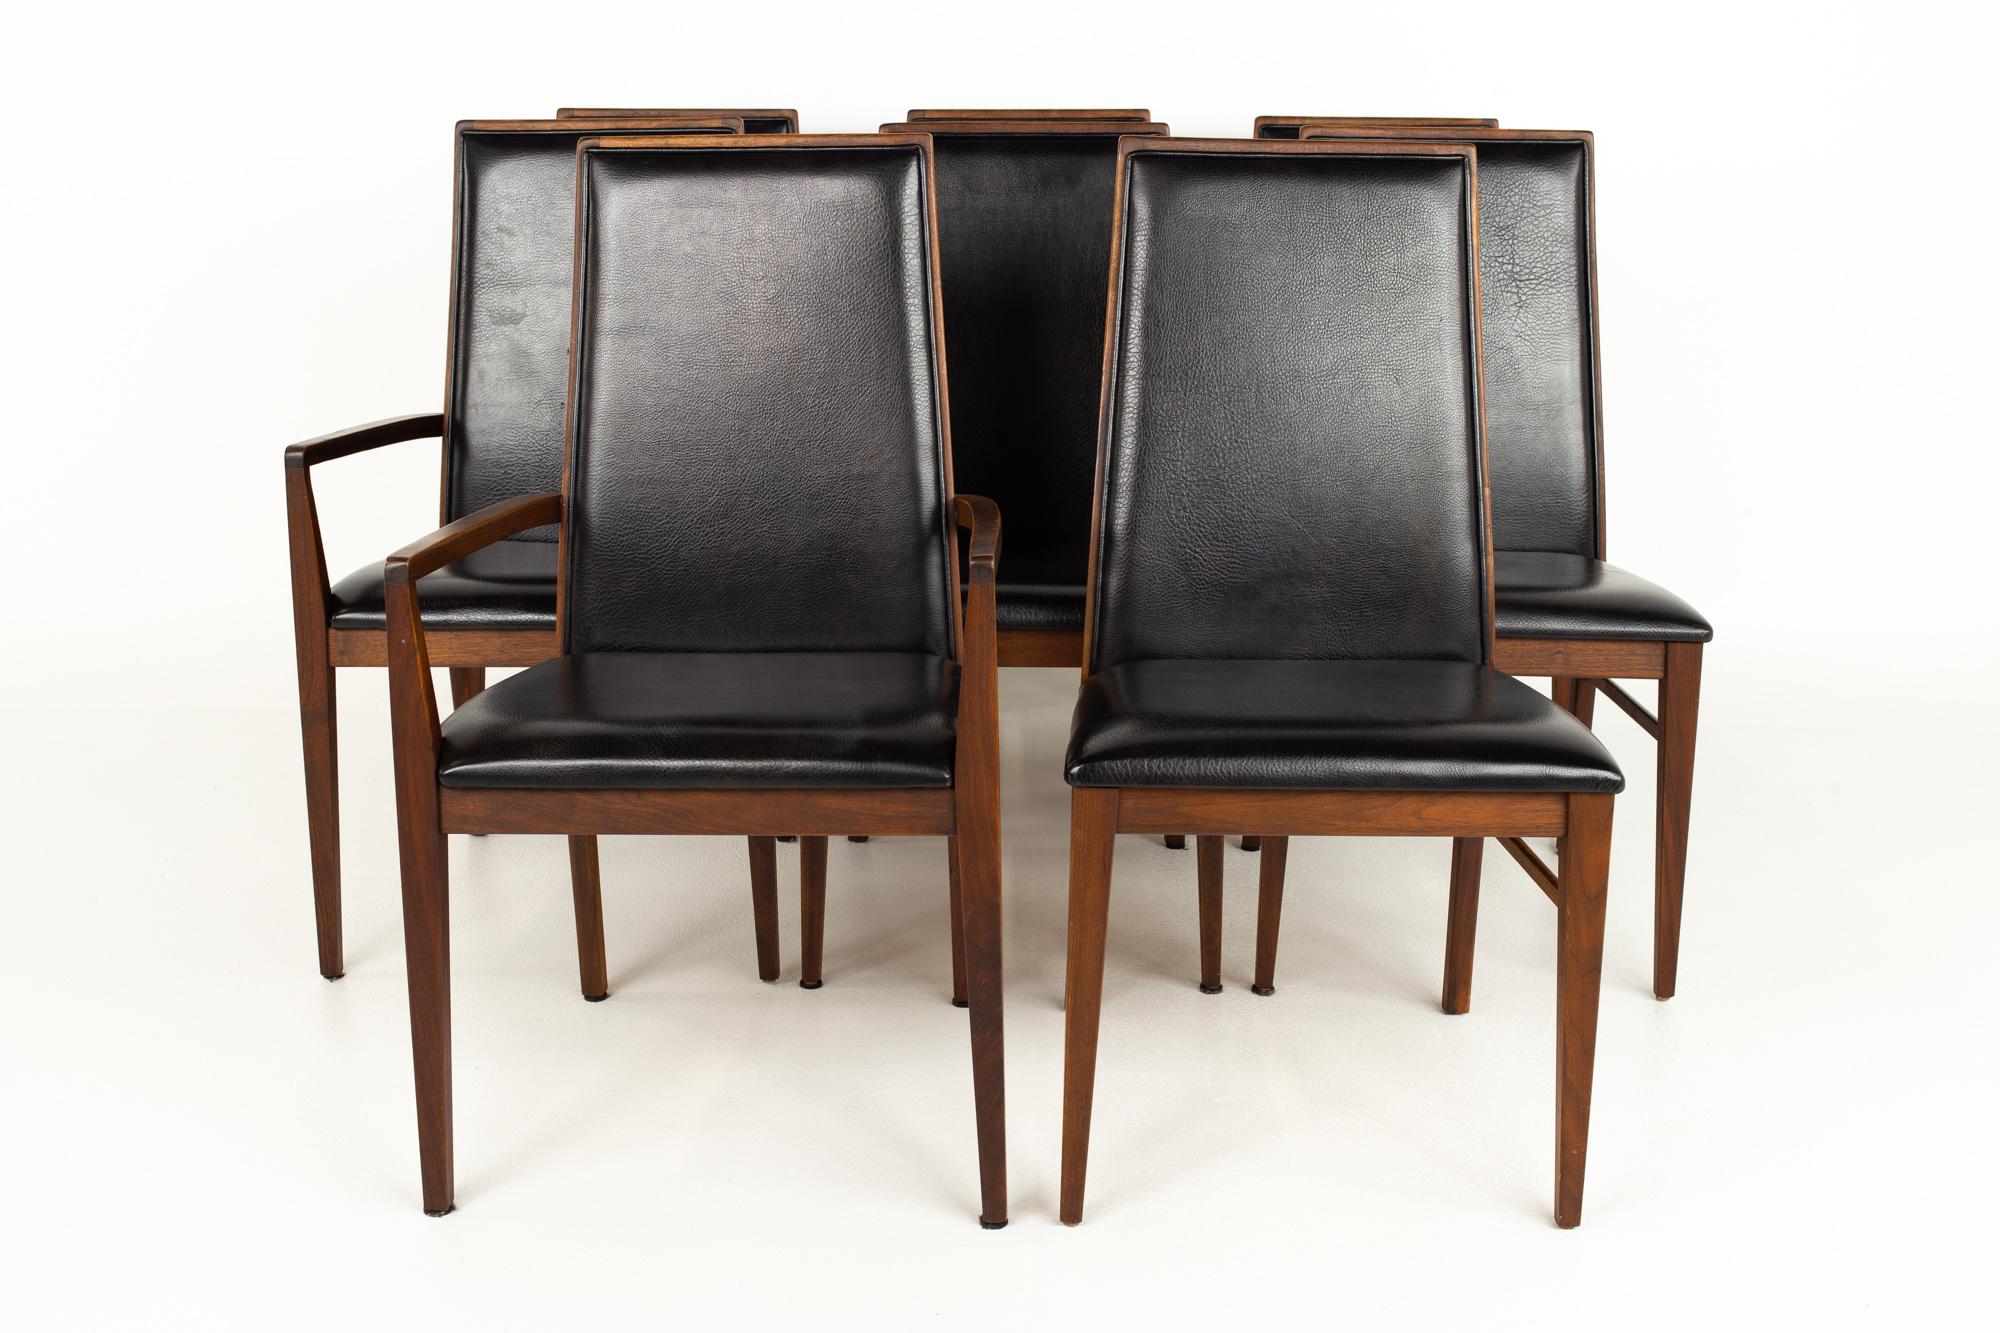 Merton Gershun for Dillingham mid century walnut dining chairs - set of 8

Each chair measures: 20.5 wide x 20 deep x 37.5 high, with a seat height of 18.5 inches and arm height of 24 inches

?All pieces of furniture can be had in what we call